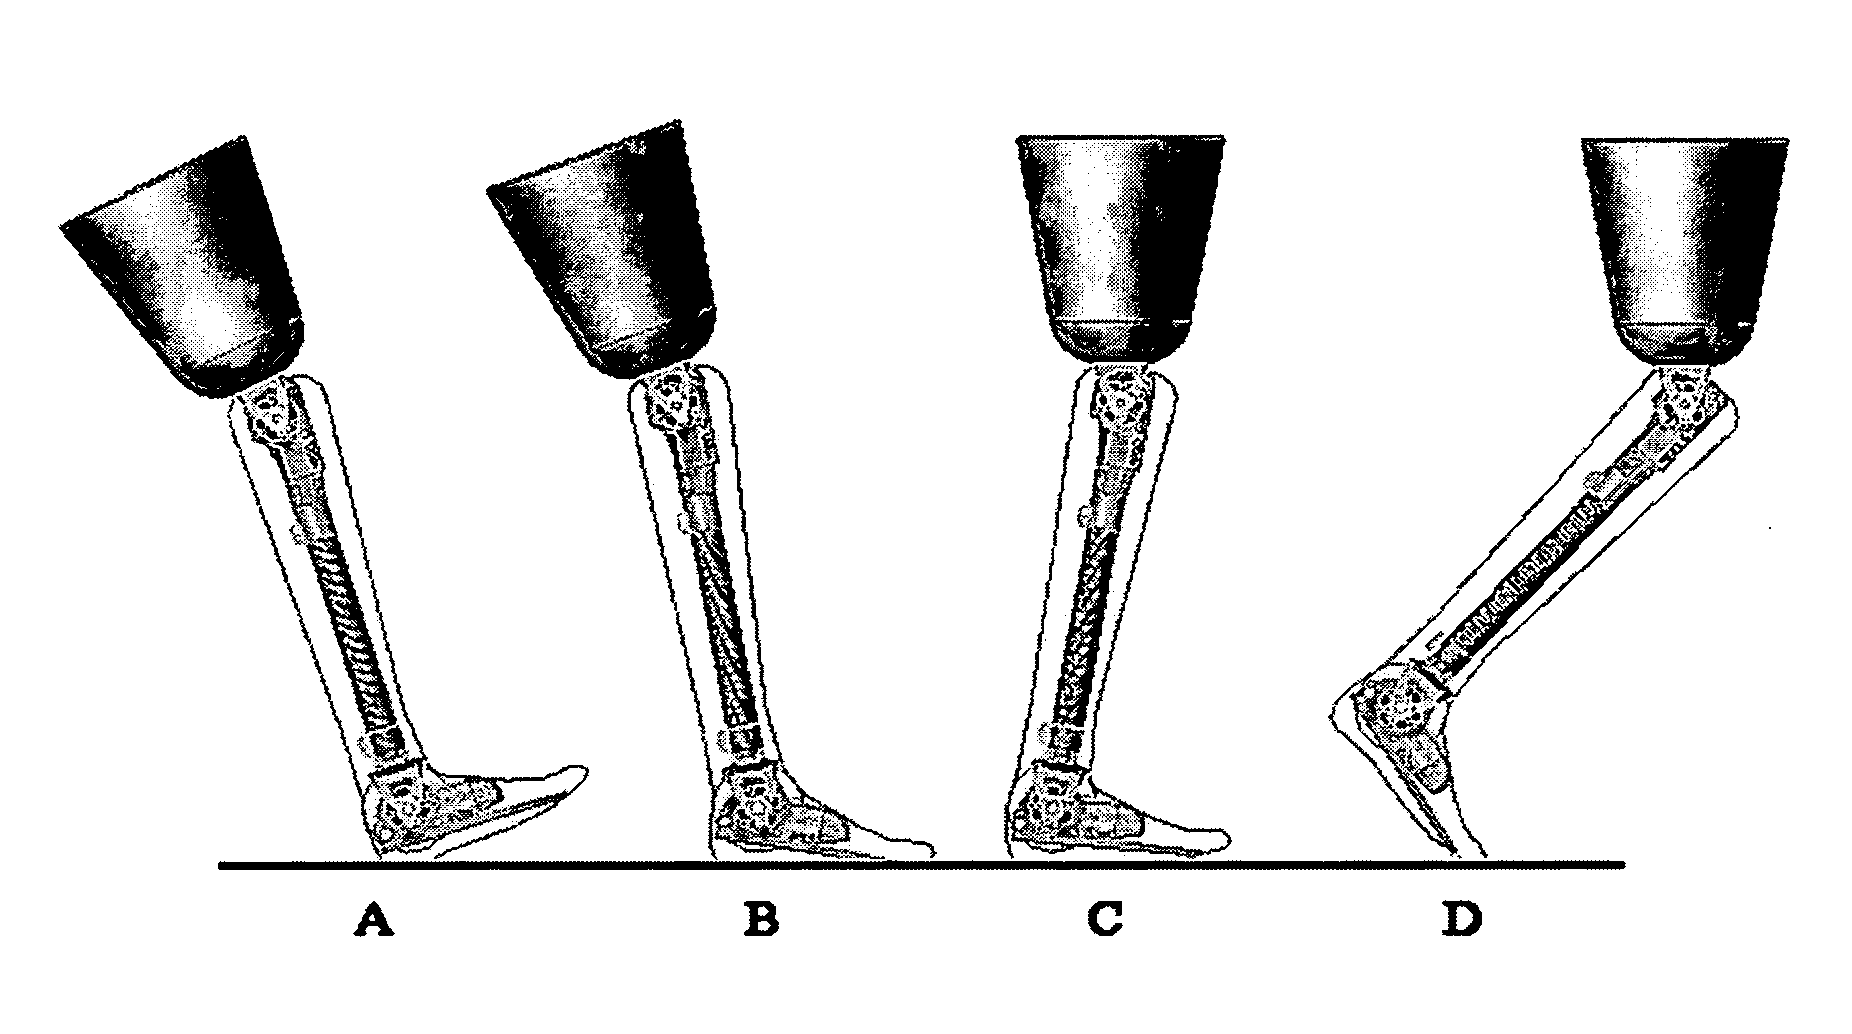 Device and system for prosthetic knees and ankles